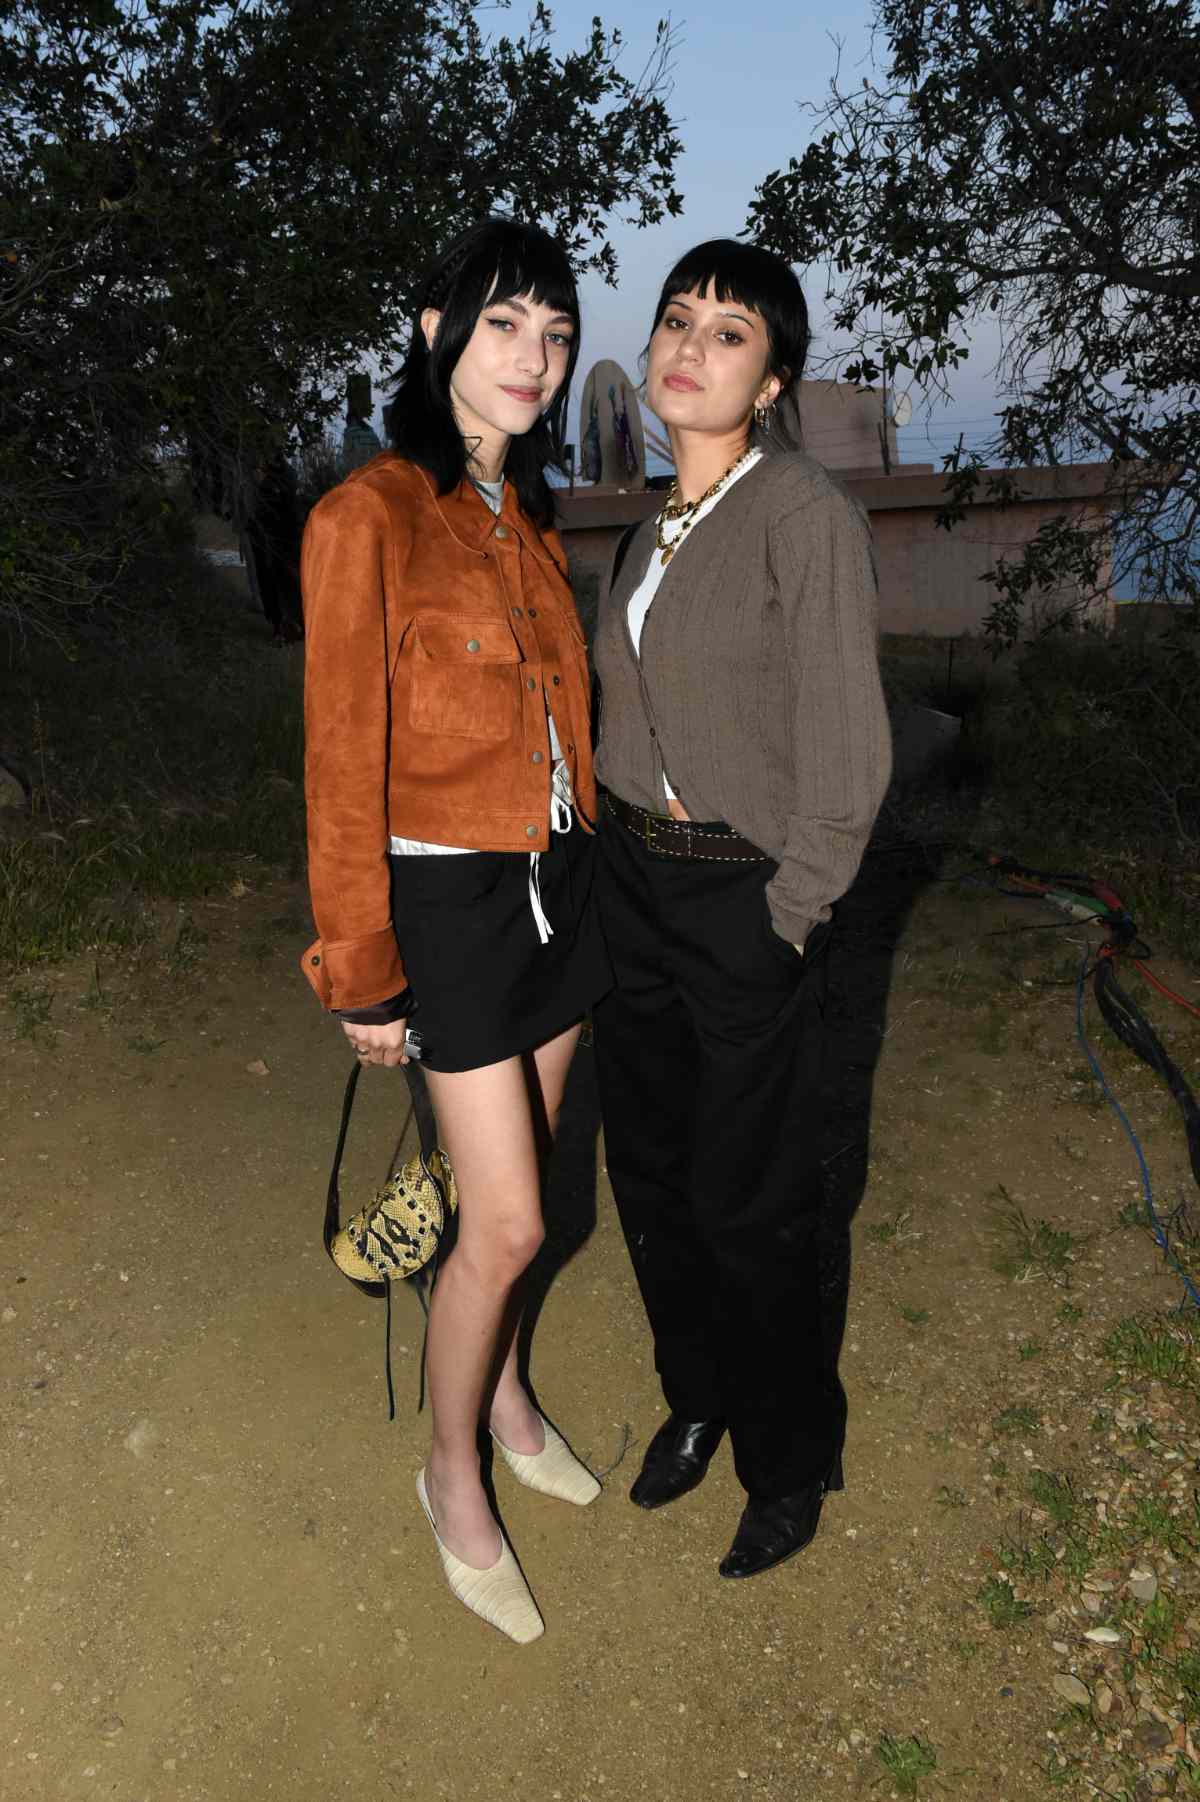 Acne Studios Hosted Los Angeles Sunset Ceremony In Celebration Of Collaboration With Angelo Plessas